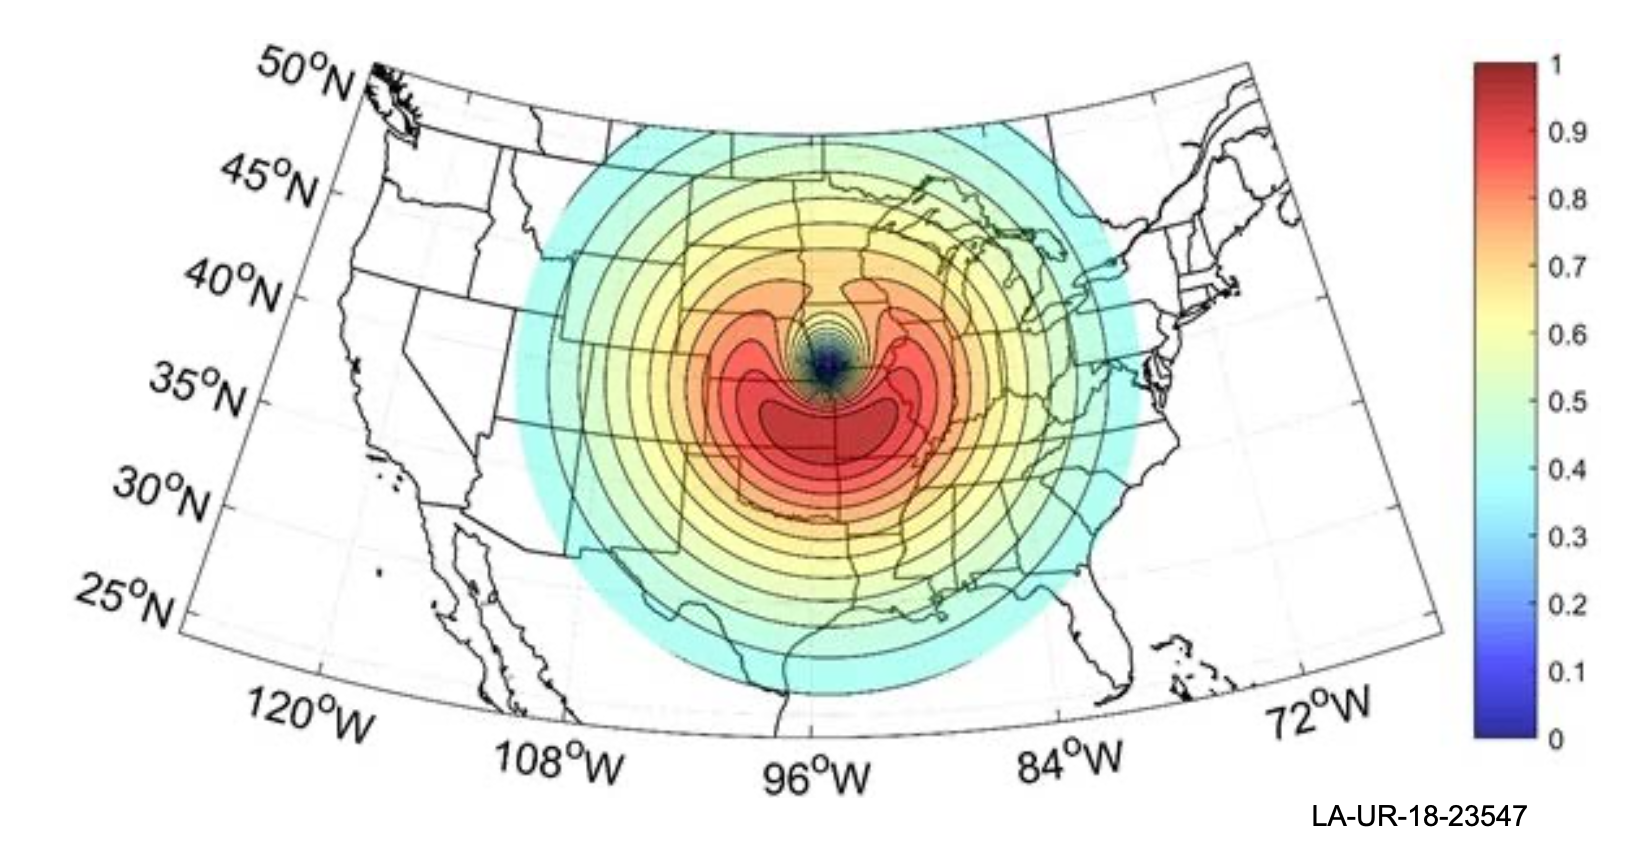 The threat of an EMP attack on U.S.